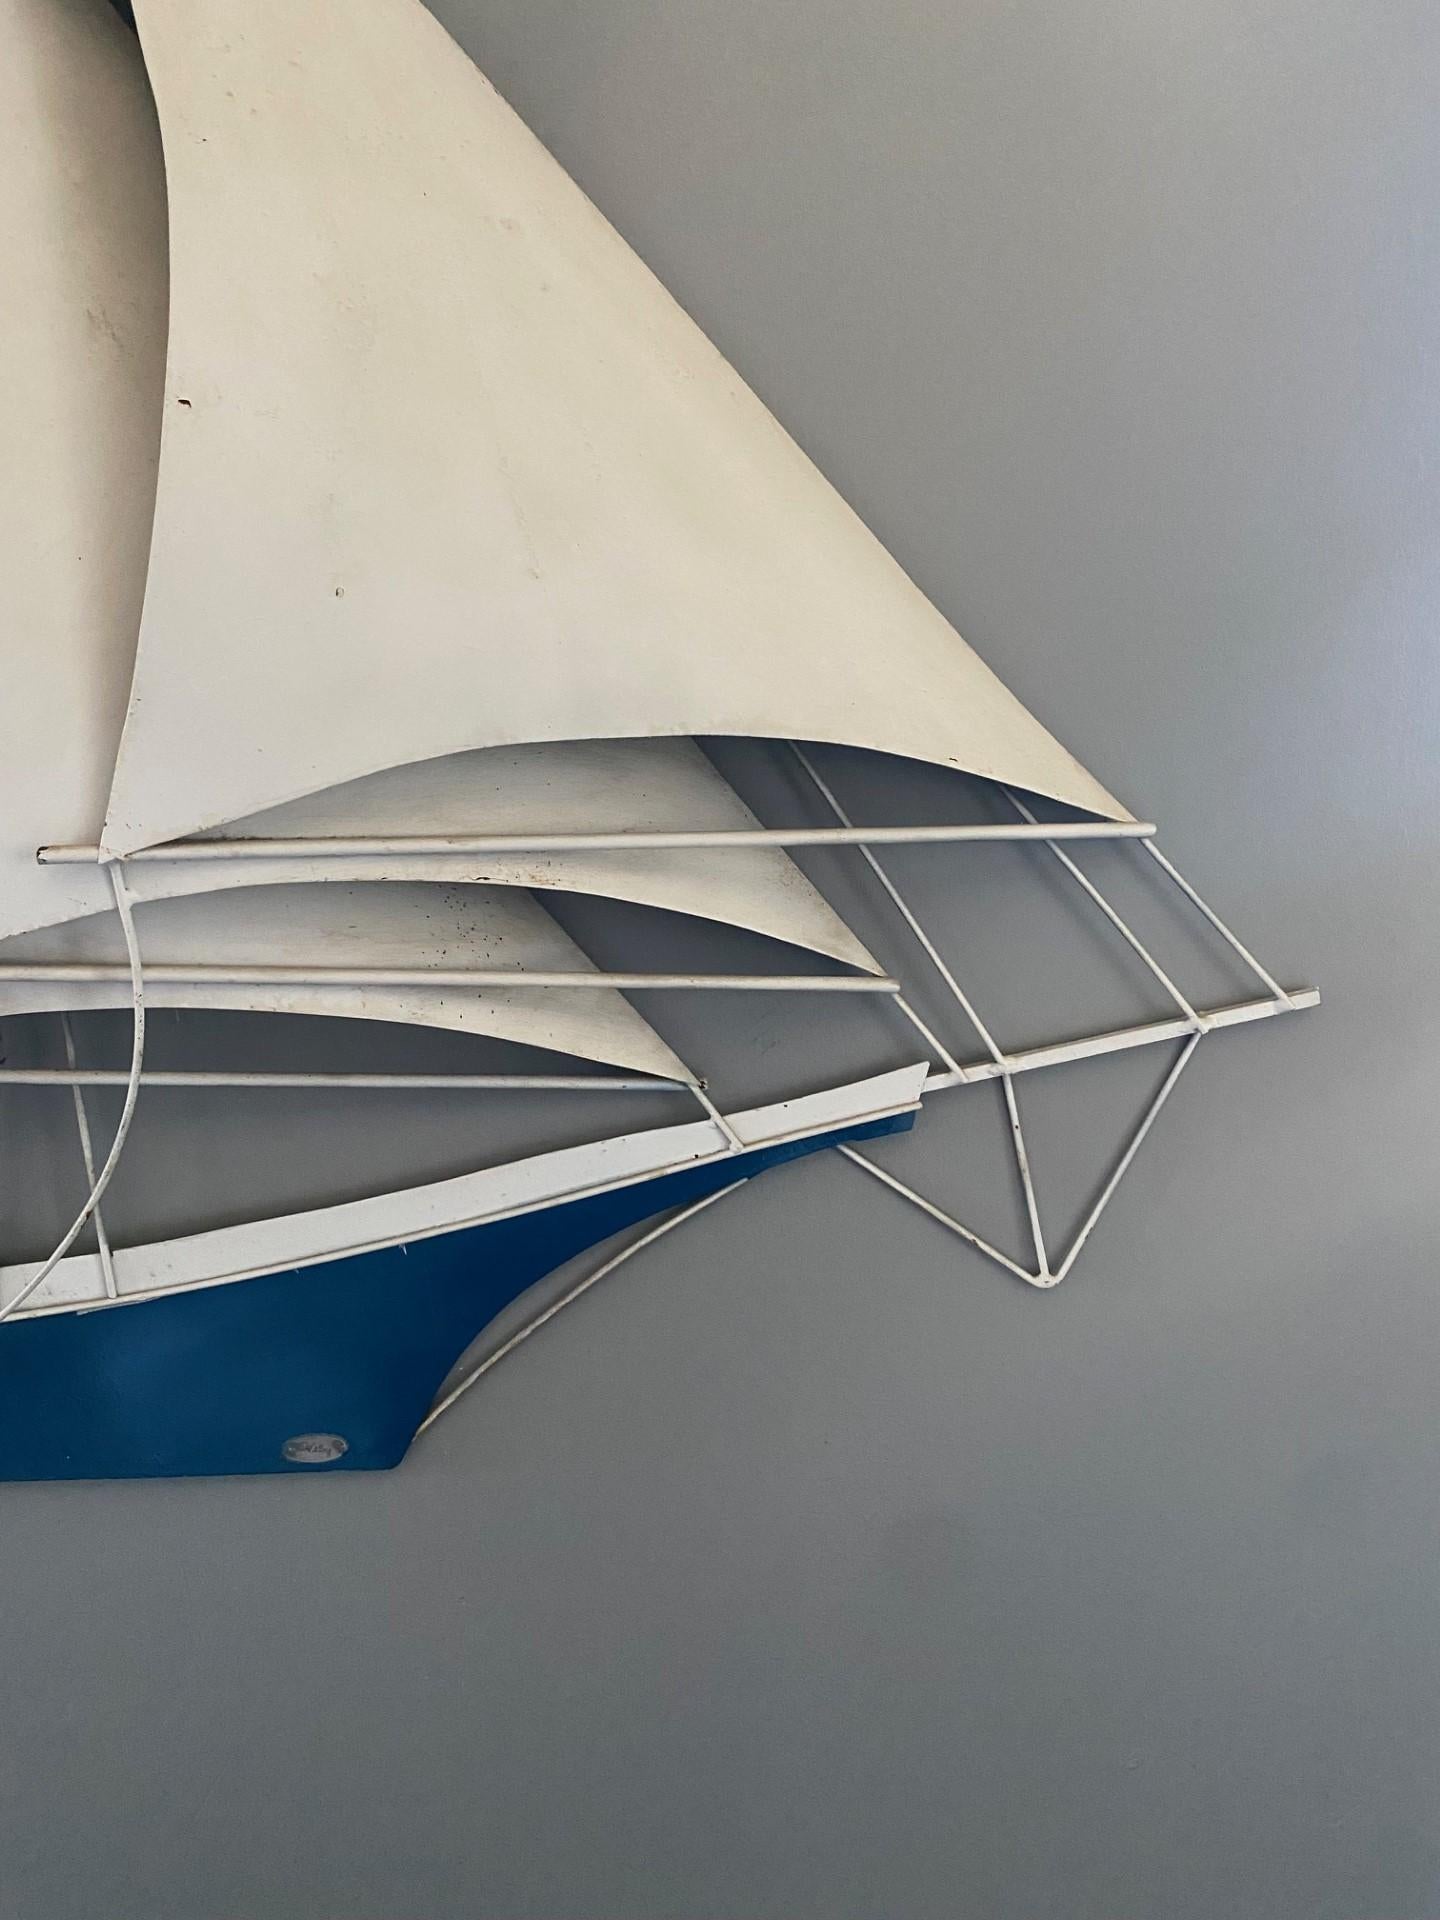 Large Vintage Sailing Boat Wall Sculpture by Wiley In Good Condition For Sale In San Diego, CA